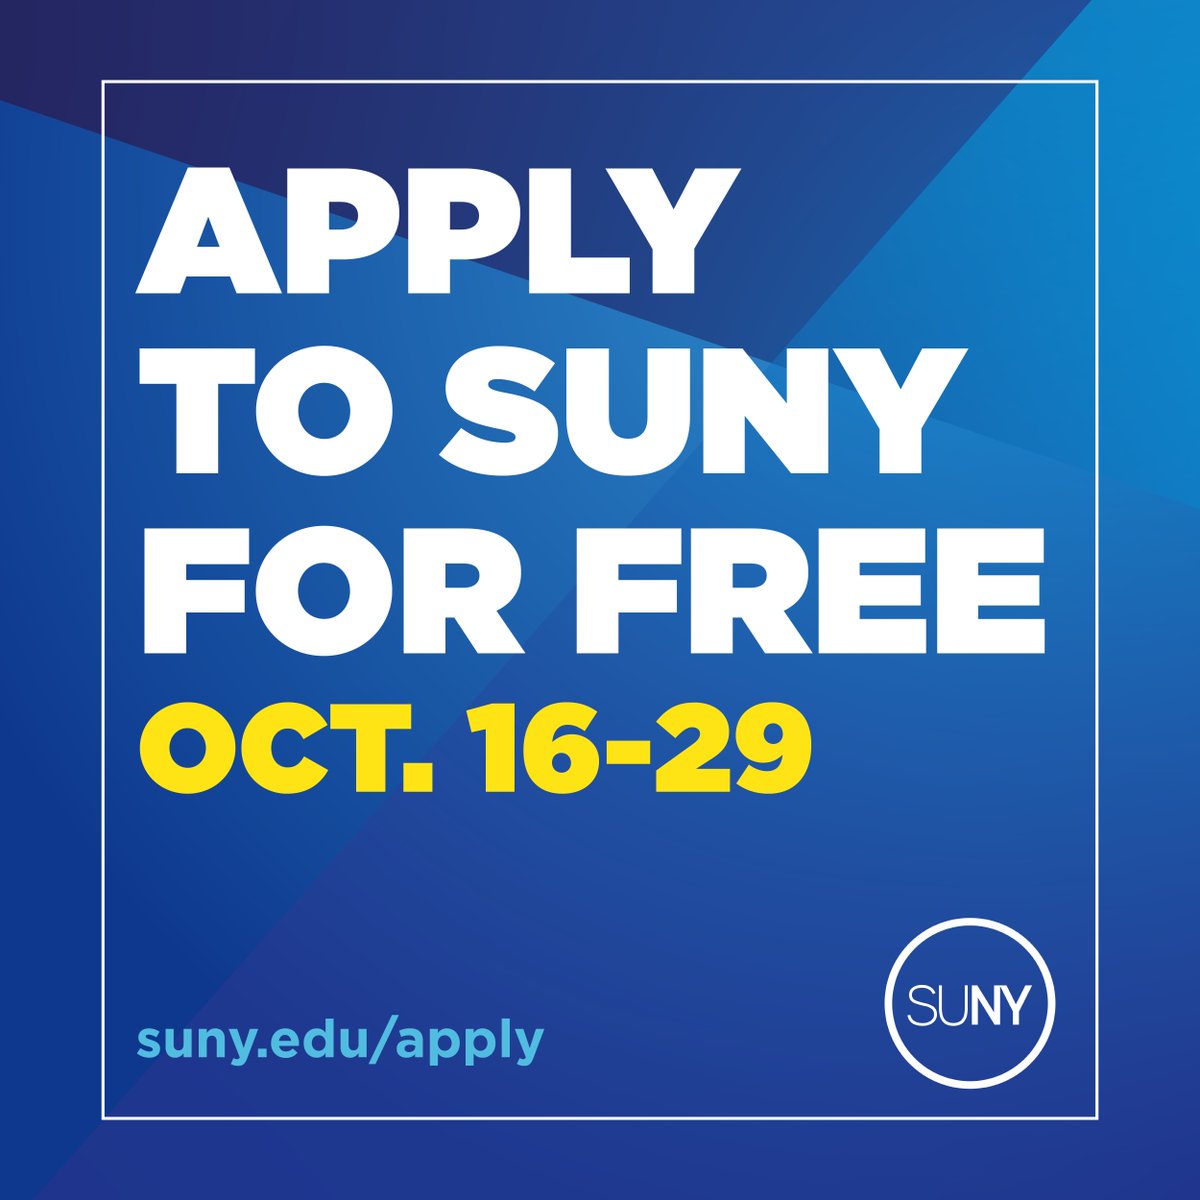 Today is the FINAL day of #SUNY Free App Weeks. Don’t miss your chance to get five free campus applications. Apply now: suny.edu/apply #ApplyToSUNY #SUNYForAll